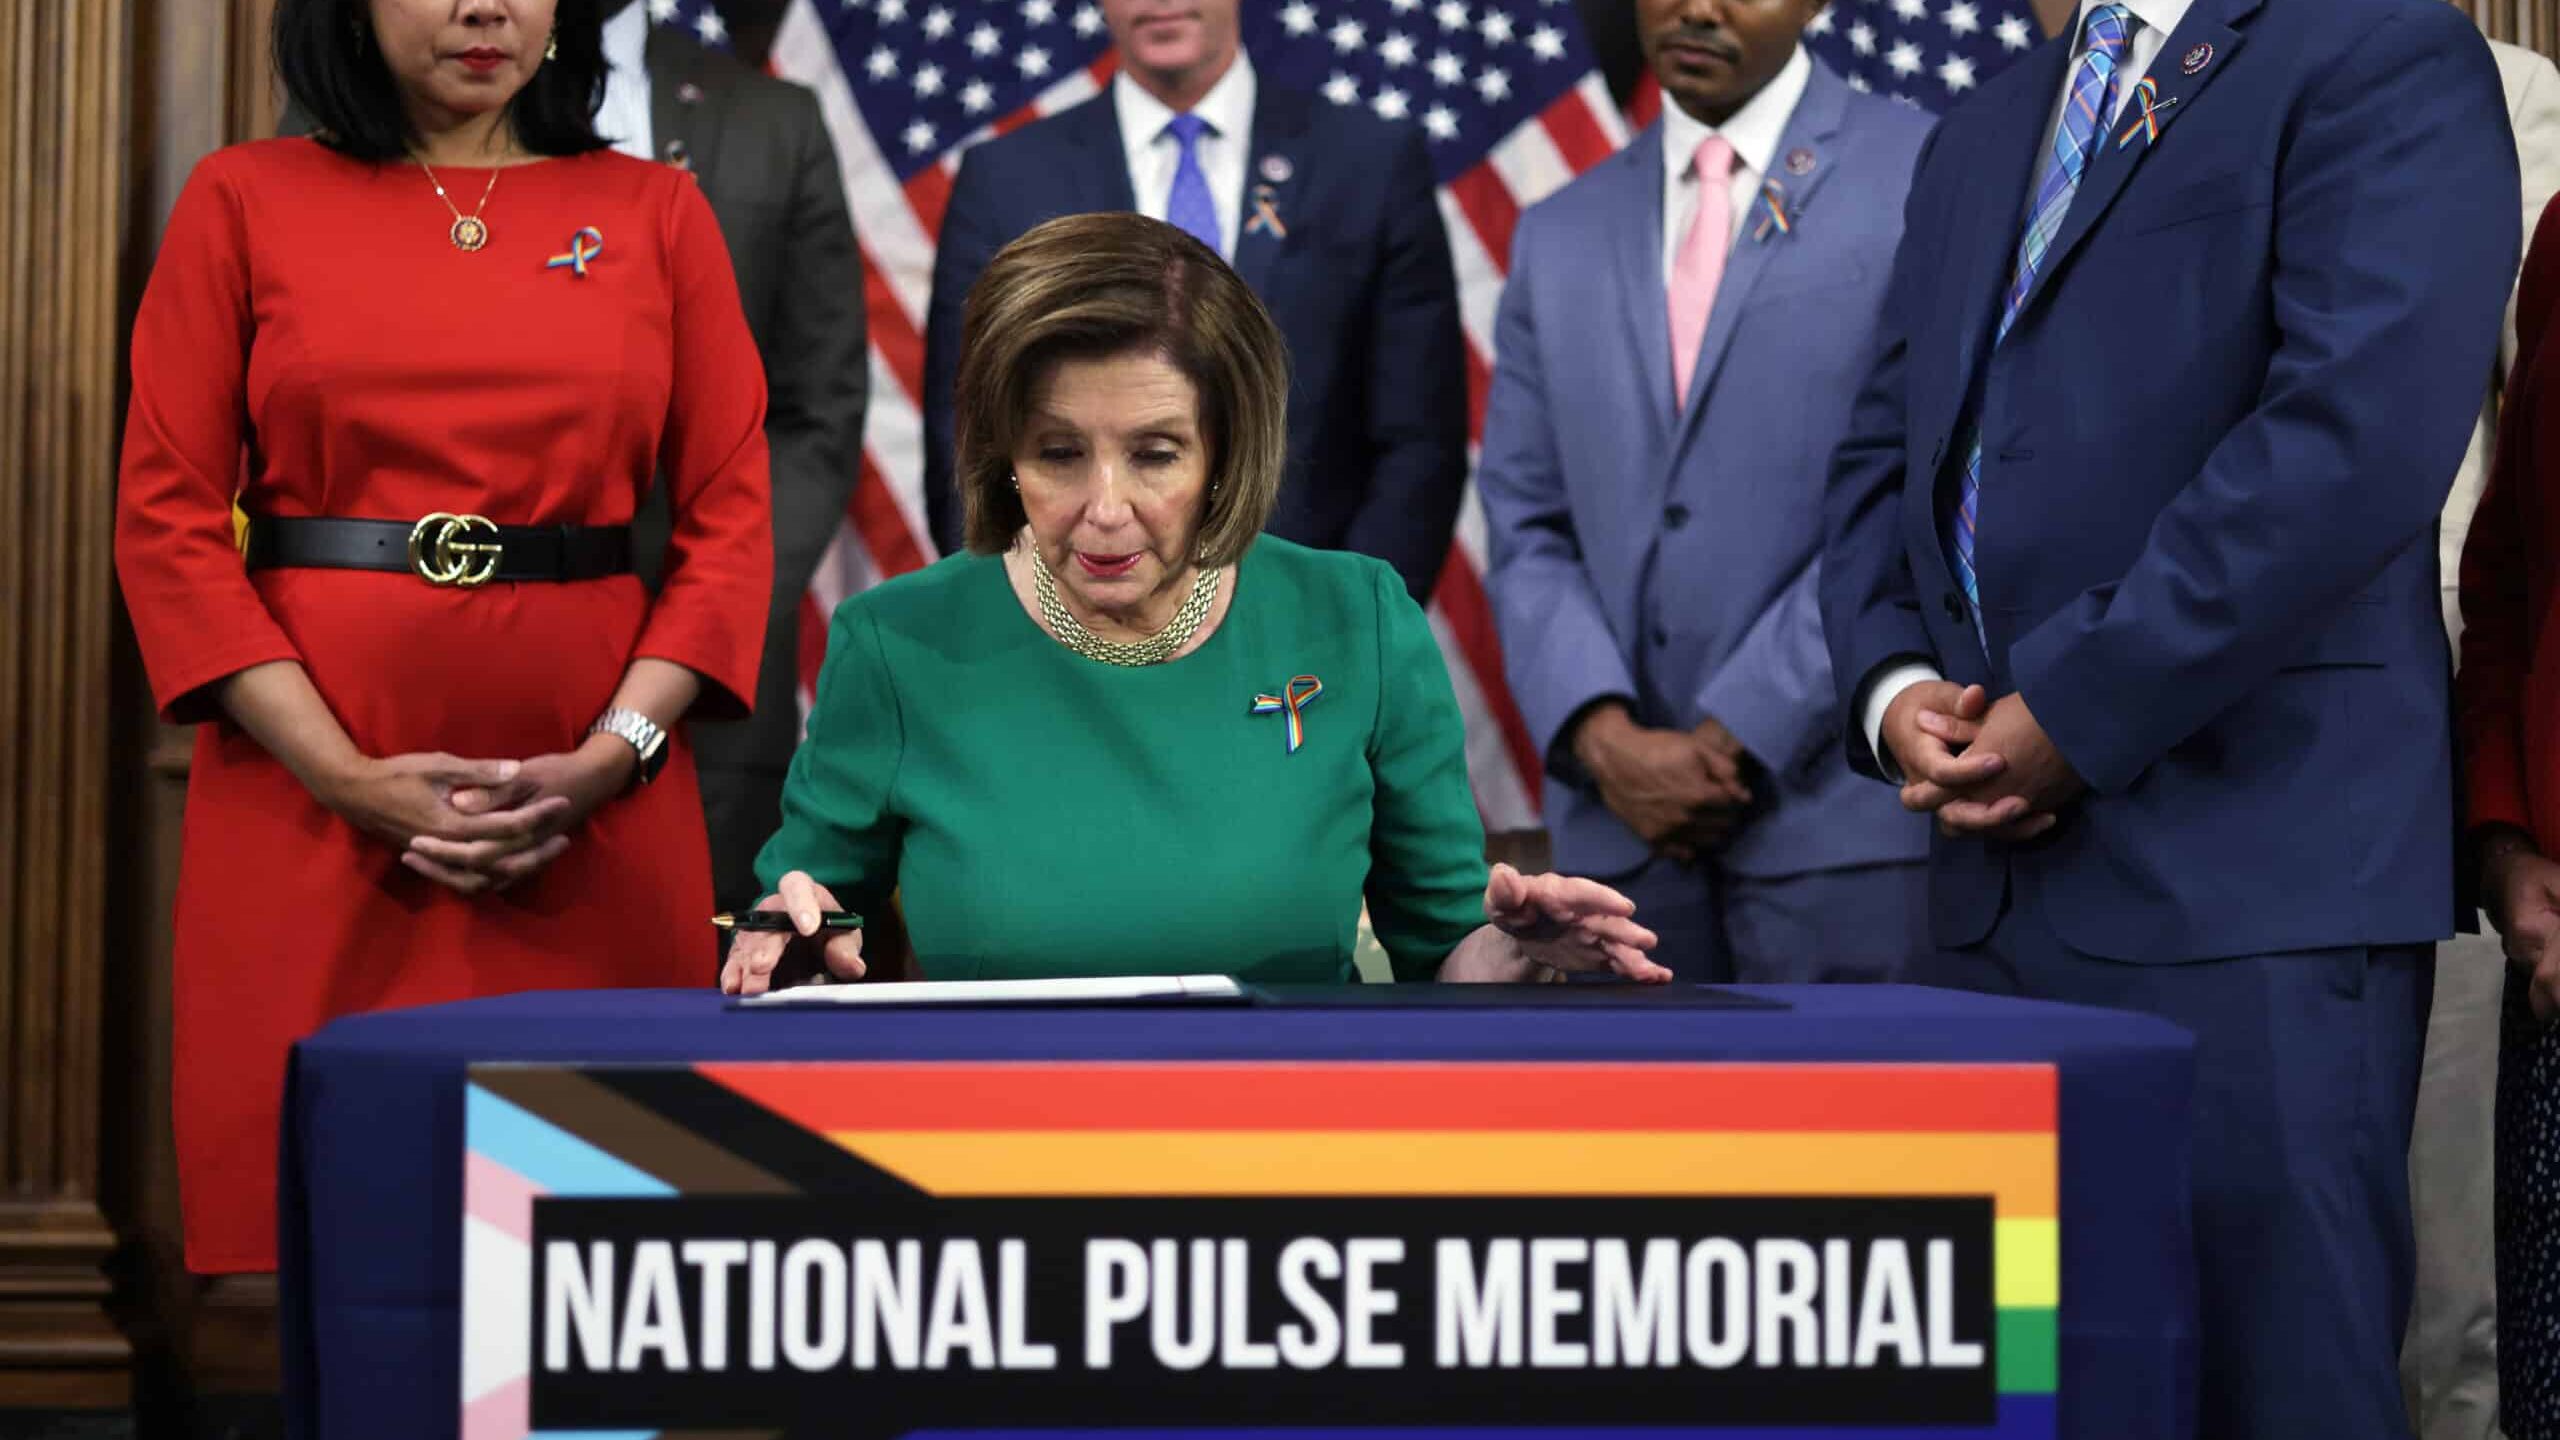 WASHINGTON, DC - JUNE 16: U.S. Speaker of the House Rep. Nancy Pelosi (D-CA) (C) participates in a bill enrollment ceremony to designate the National Pulse Memorial in Orlando, Florida, as other House Democrats look on at the U.S. Capitol June 16, 2021 in Washington, DC. The Congress has passed a legislation to designate the site of Pulse, a former LGBTQ+ nightclub, as a national memorial to honor the victims of the mass shooting on June 12, 2016 that killed 49 lives and injured dozens more.